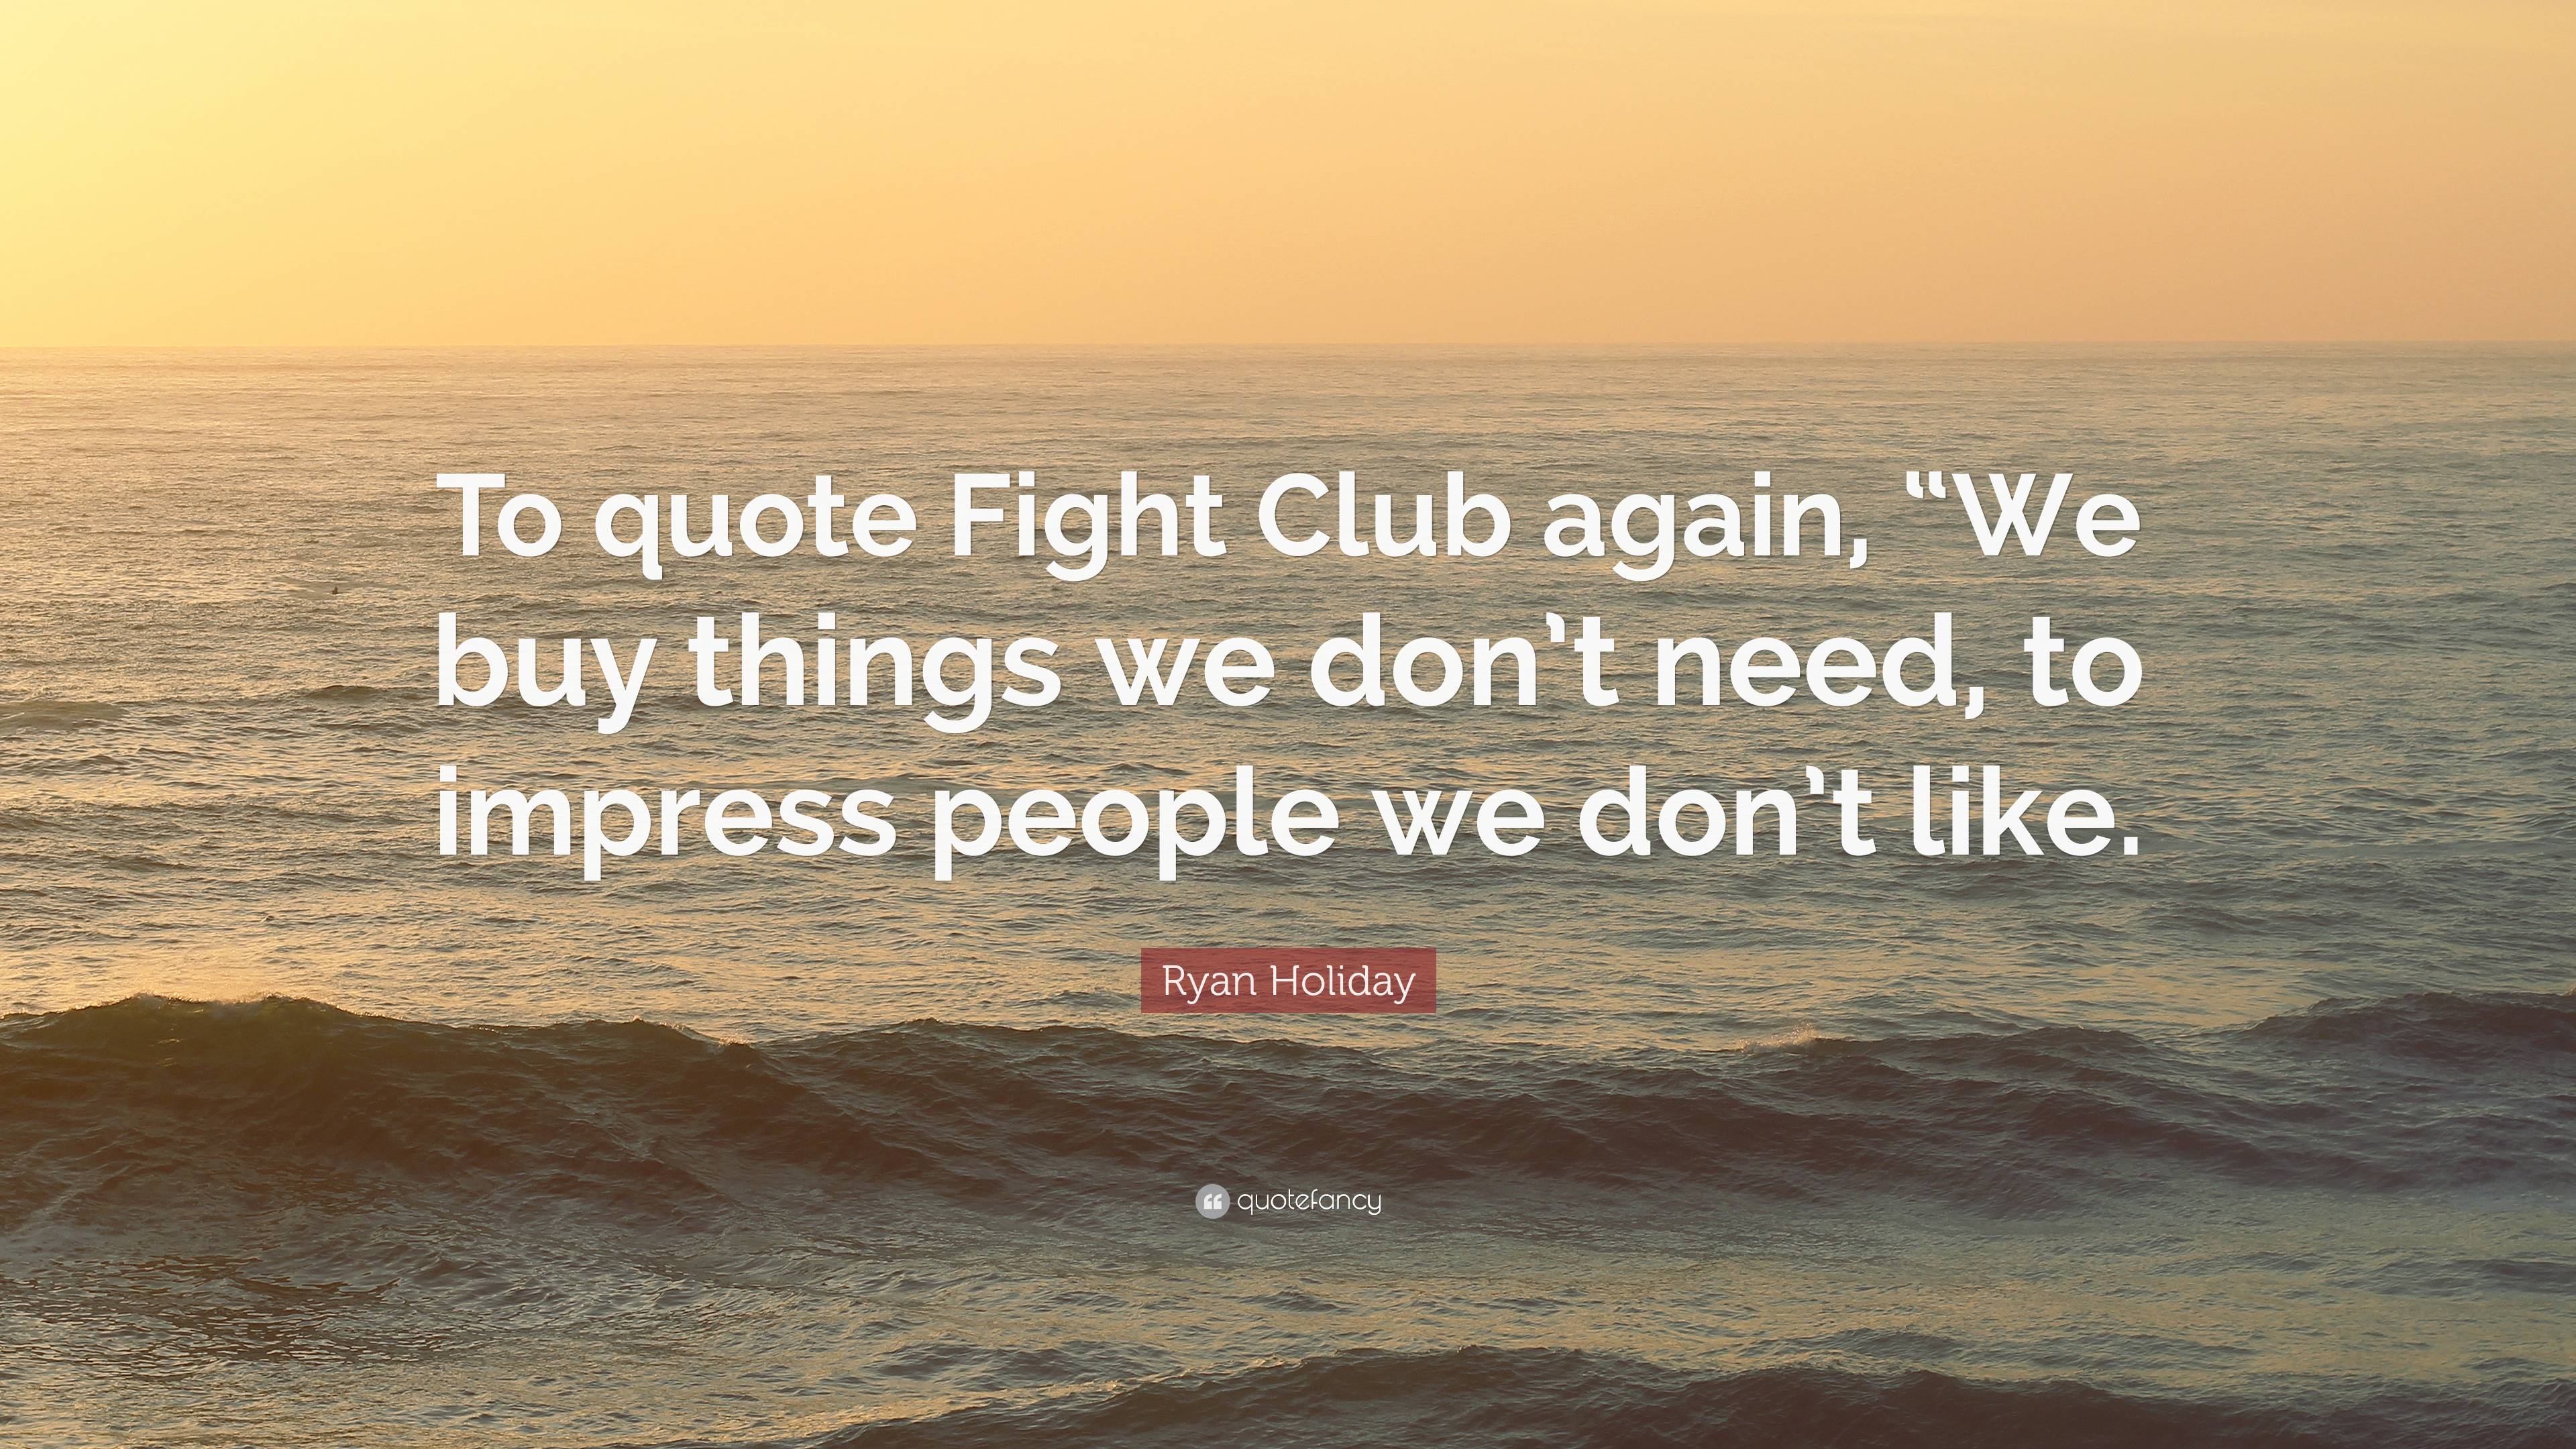 Ryan Holiday Quote: “To quote Fight Club again, “We buy things we don’t ...